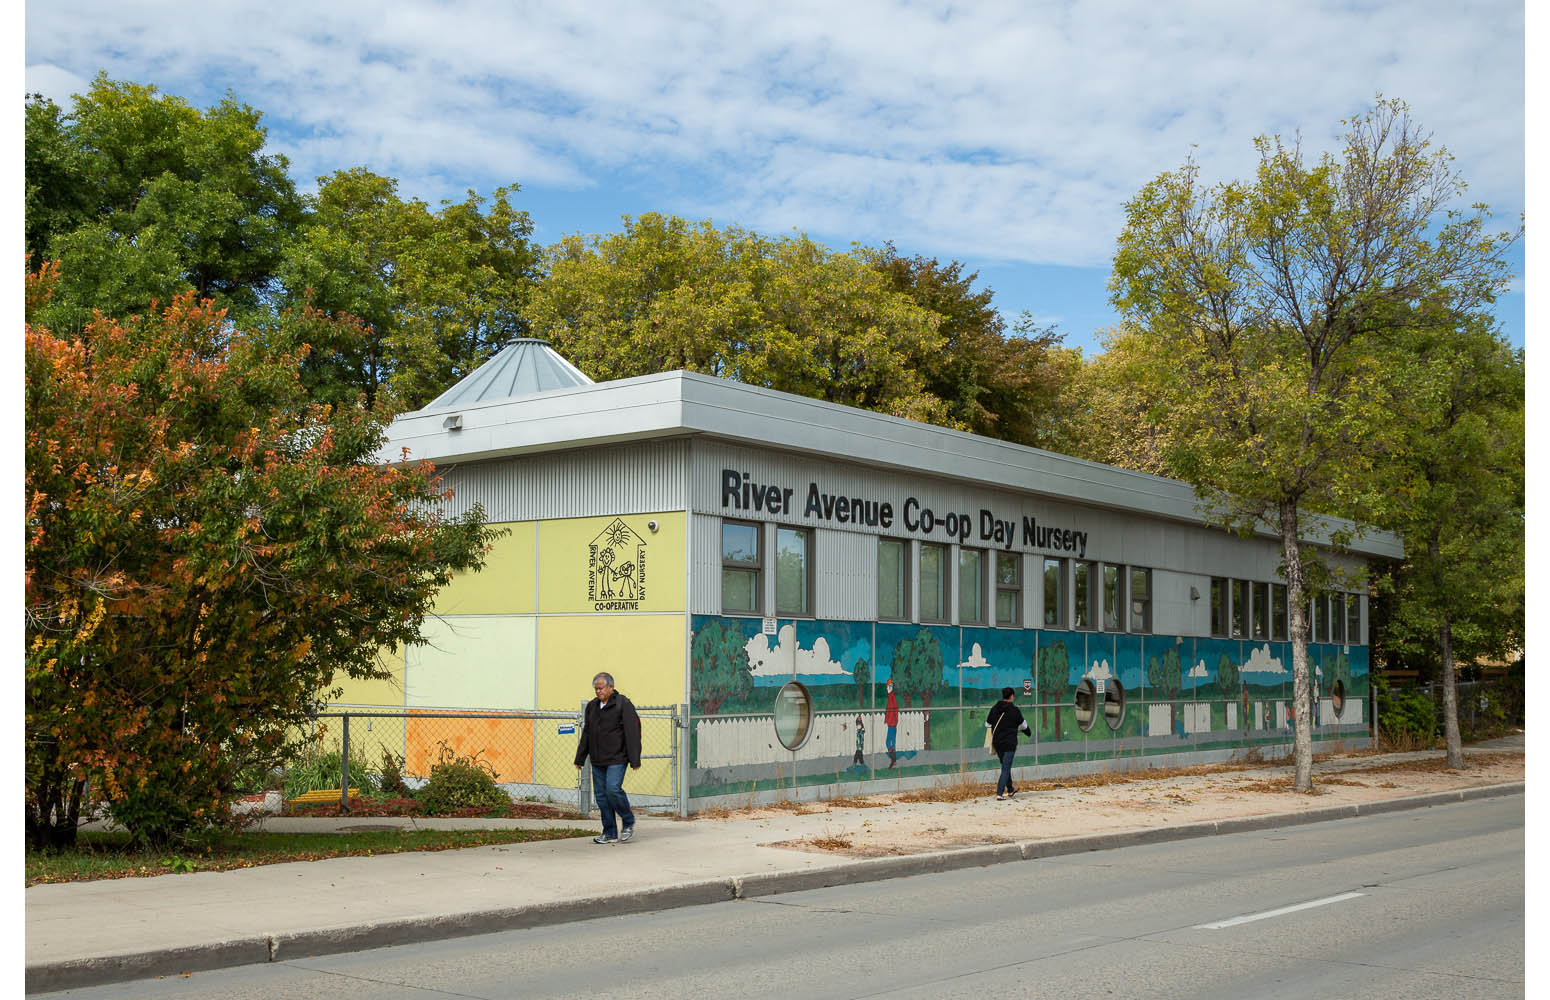  River Avenue Daycare, exterior photo of building with people walking by / Photo:  Lindsay Reid  